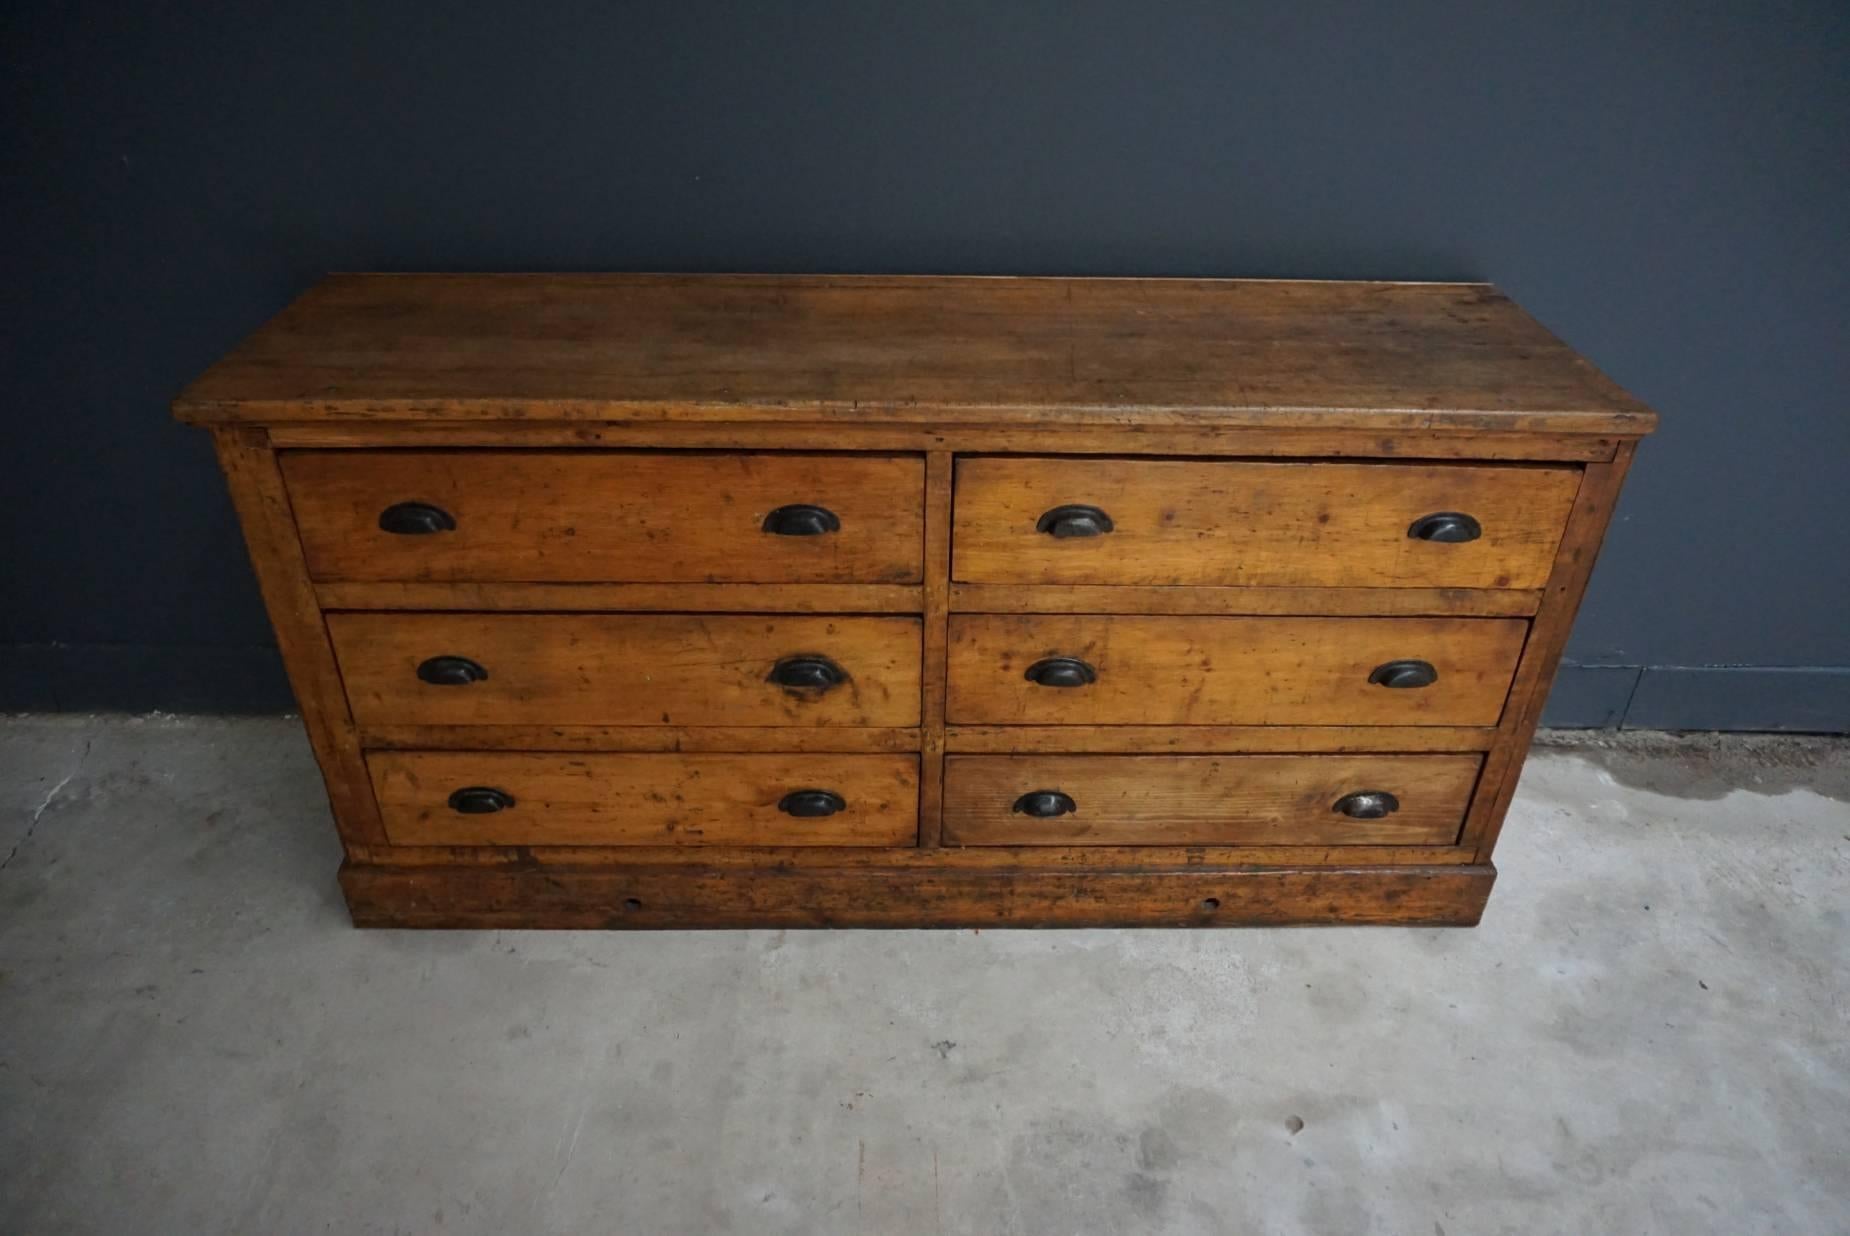 This apothecary bank of drawers was designed and made circa 1930s in France. The piece is made from pine and beechwood with metal handles. It was used in a factory for chalks. We have a matching cabinet in another listing.